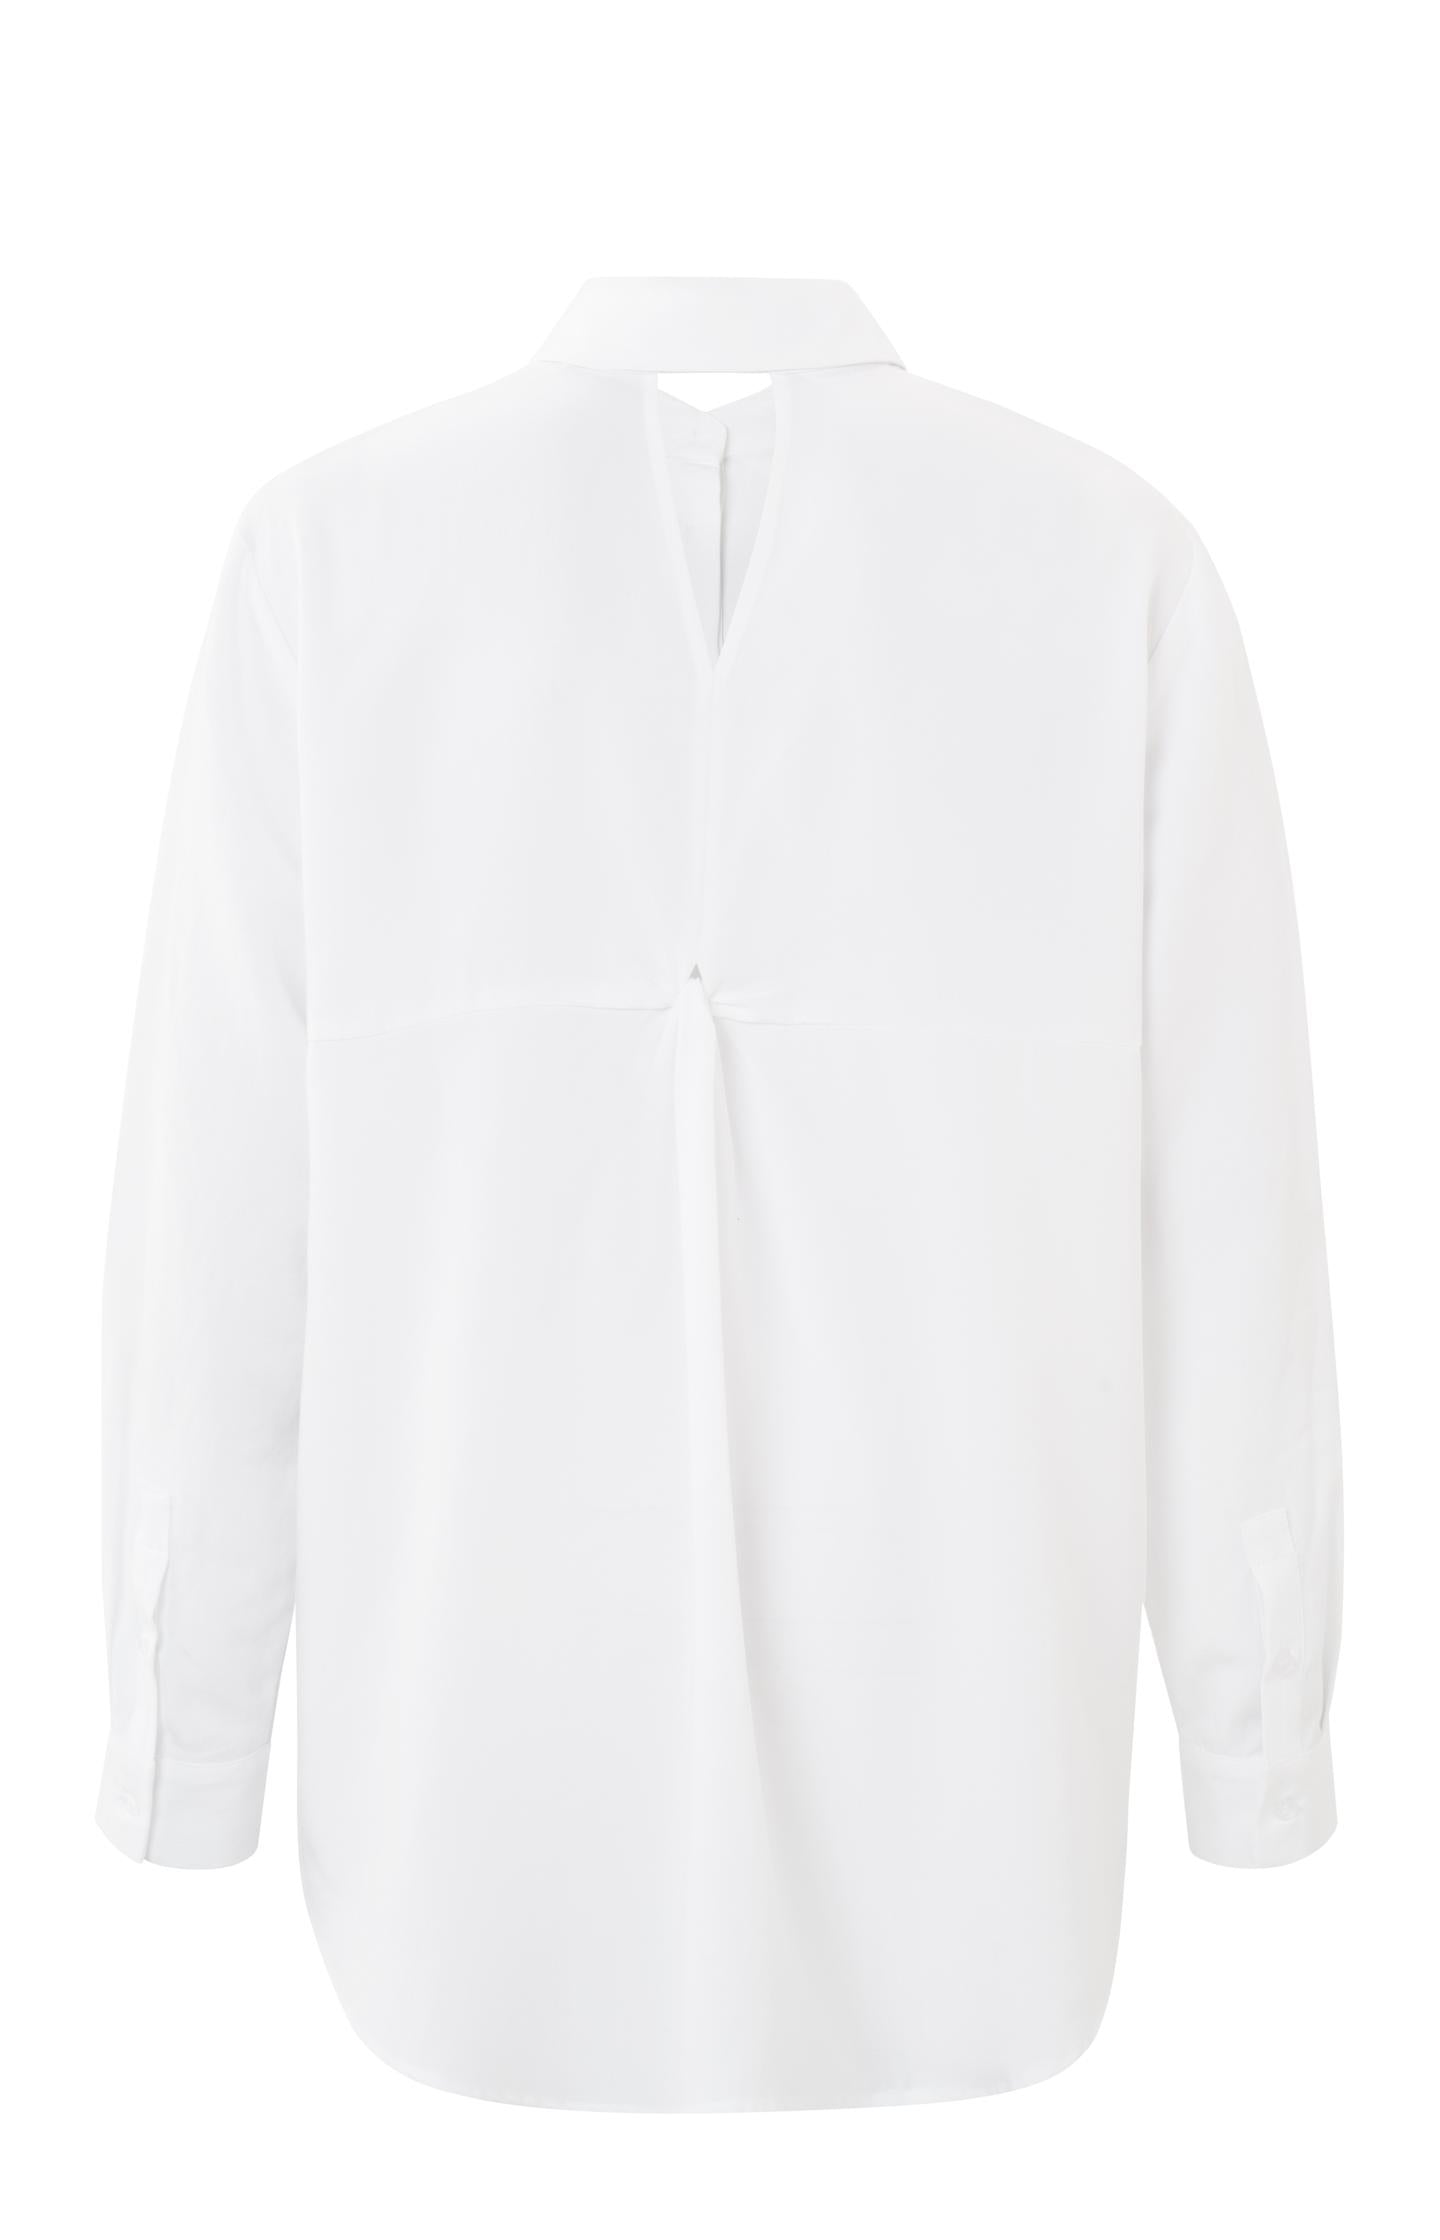 Button up blouse with long sleeves and detail on the back